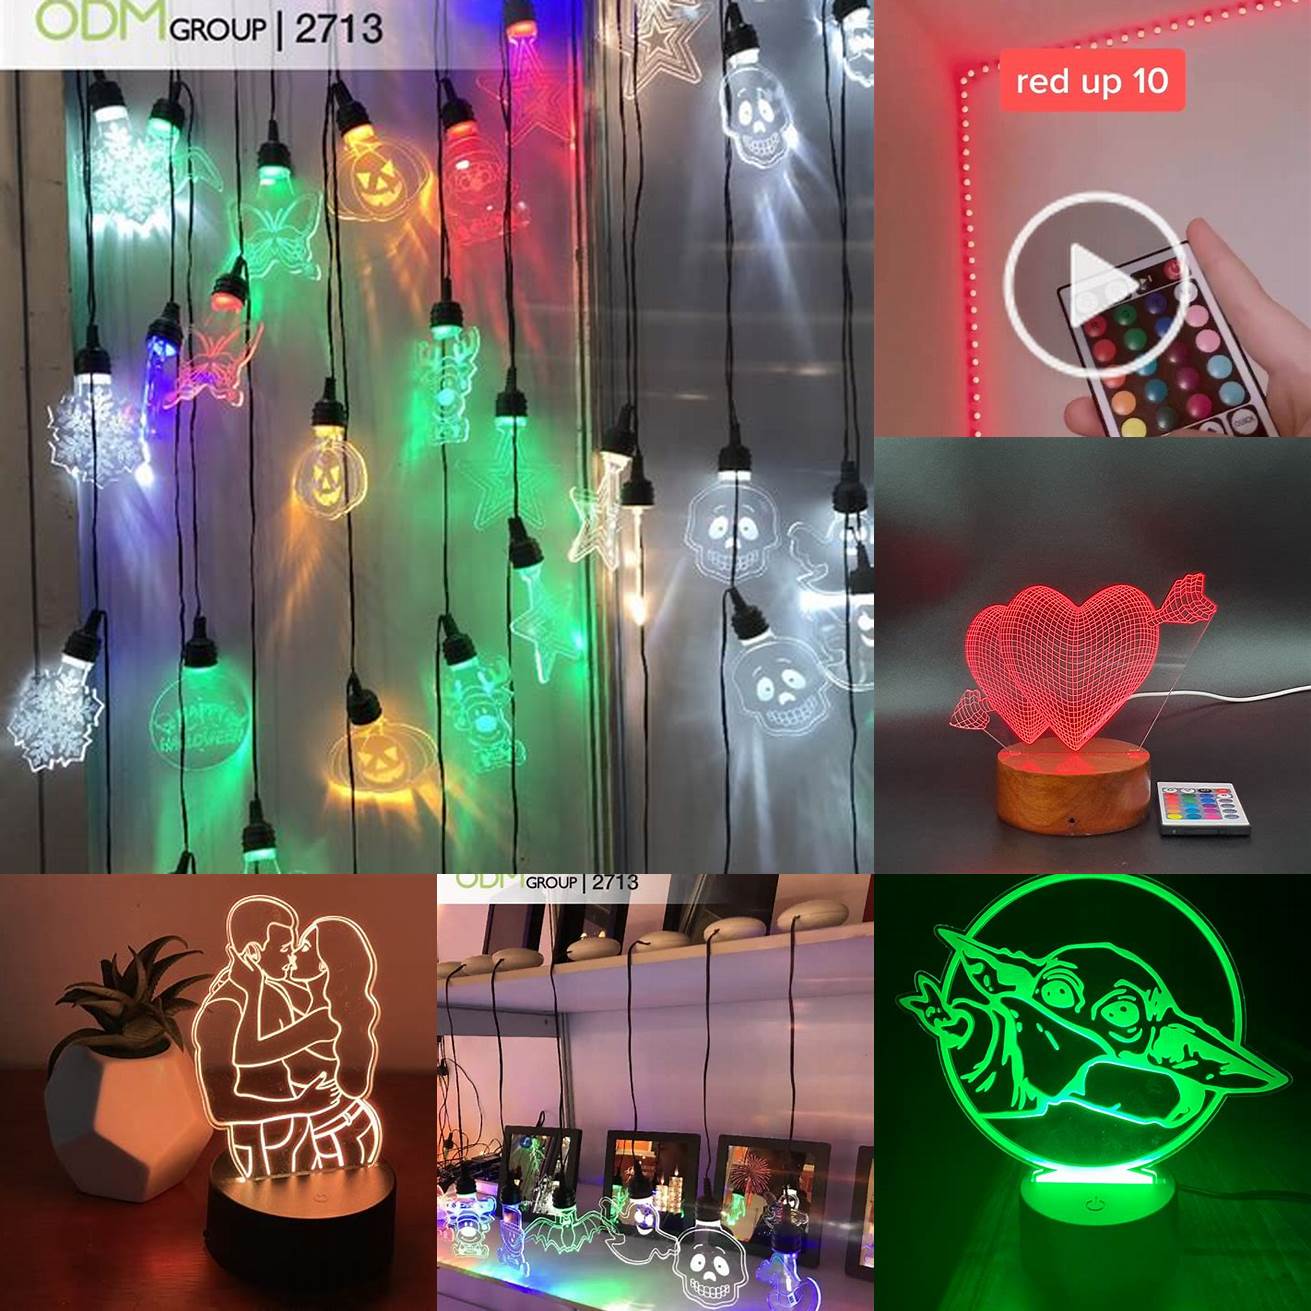 Customize the LED lights to match your style or mood